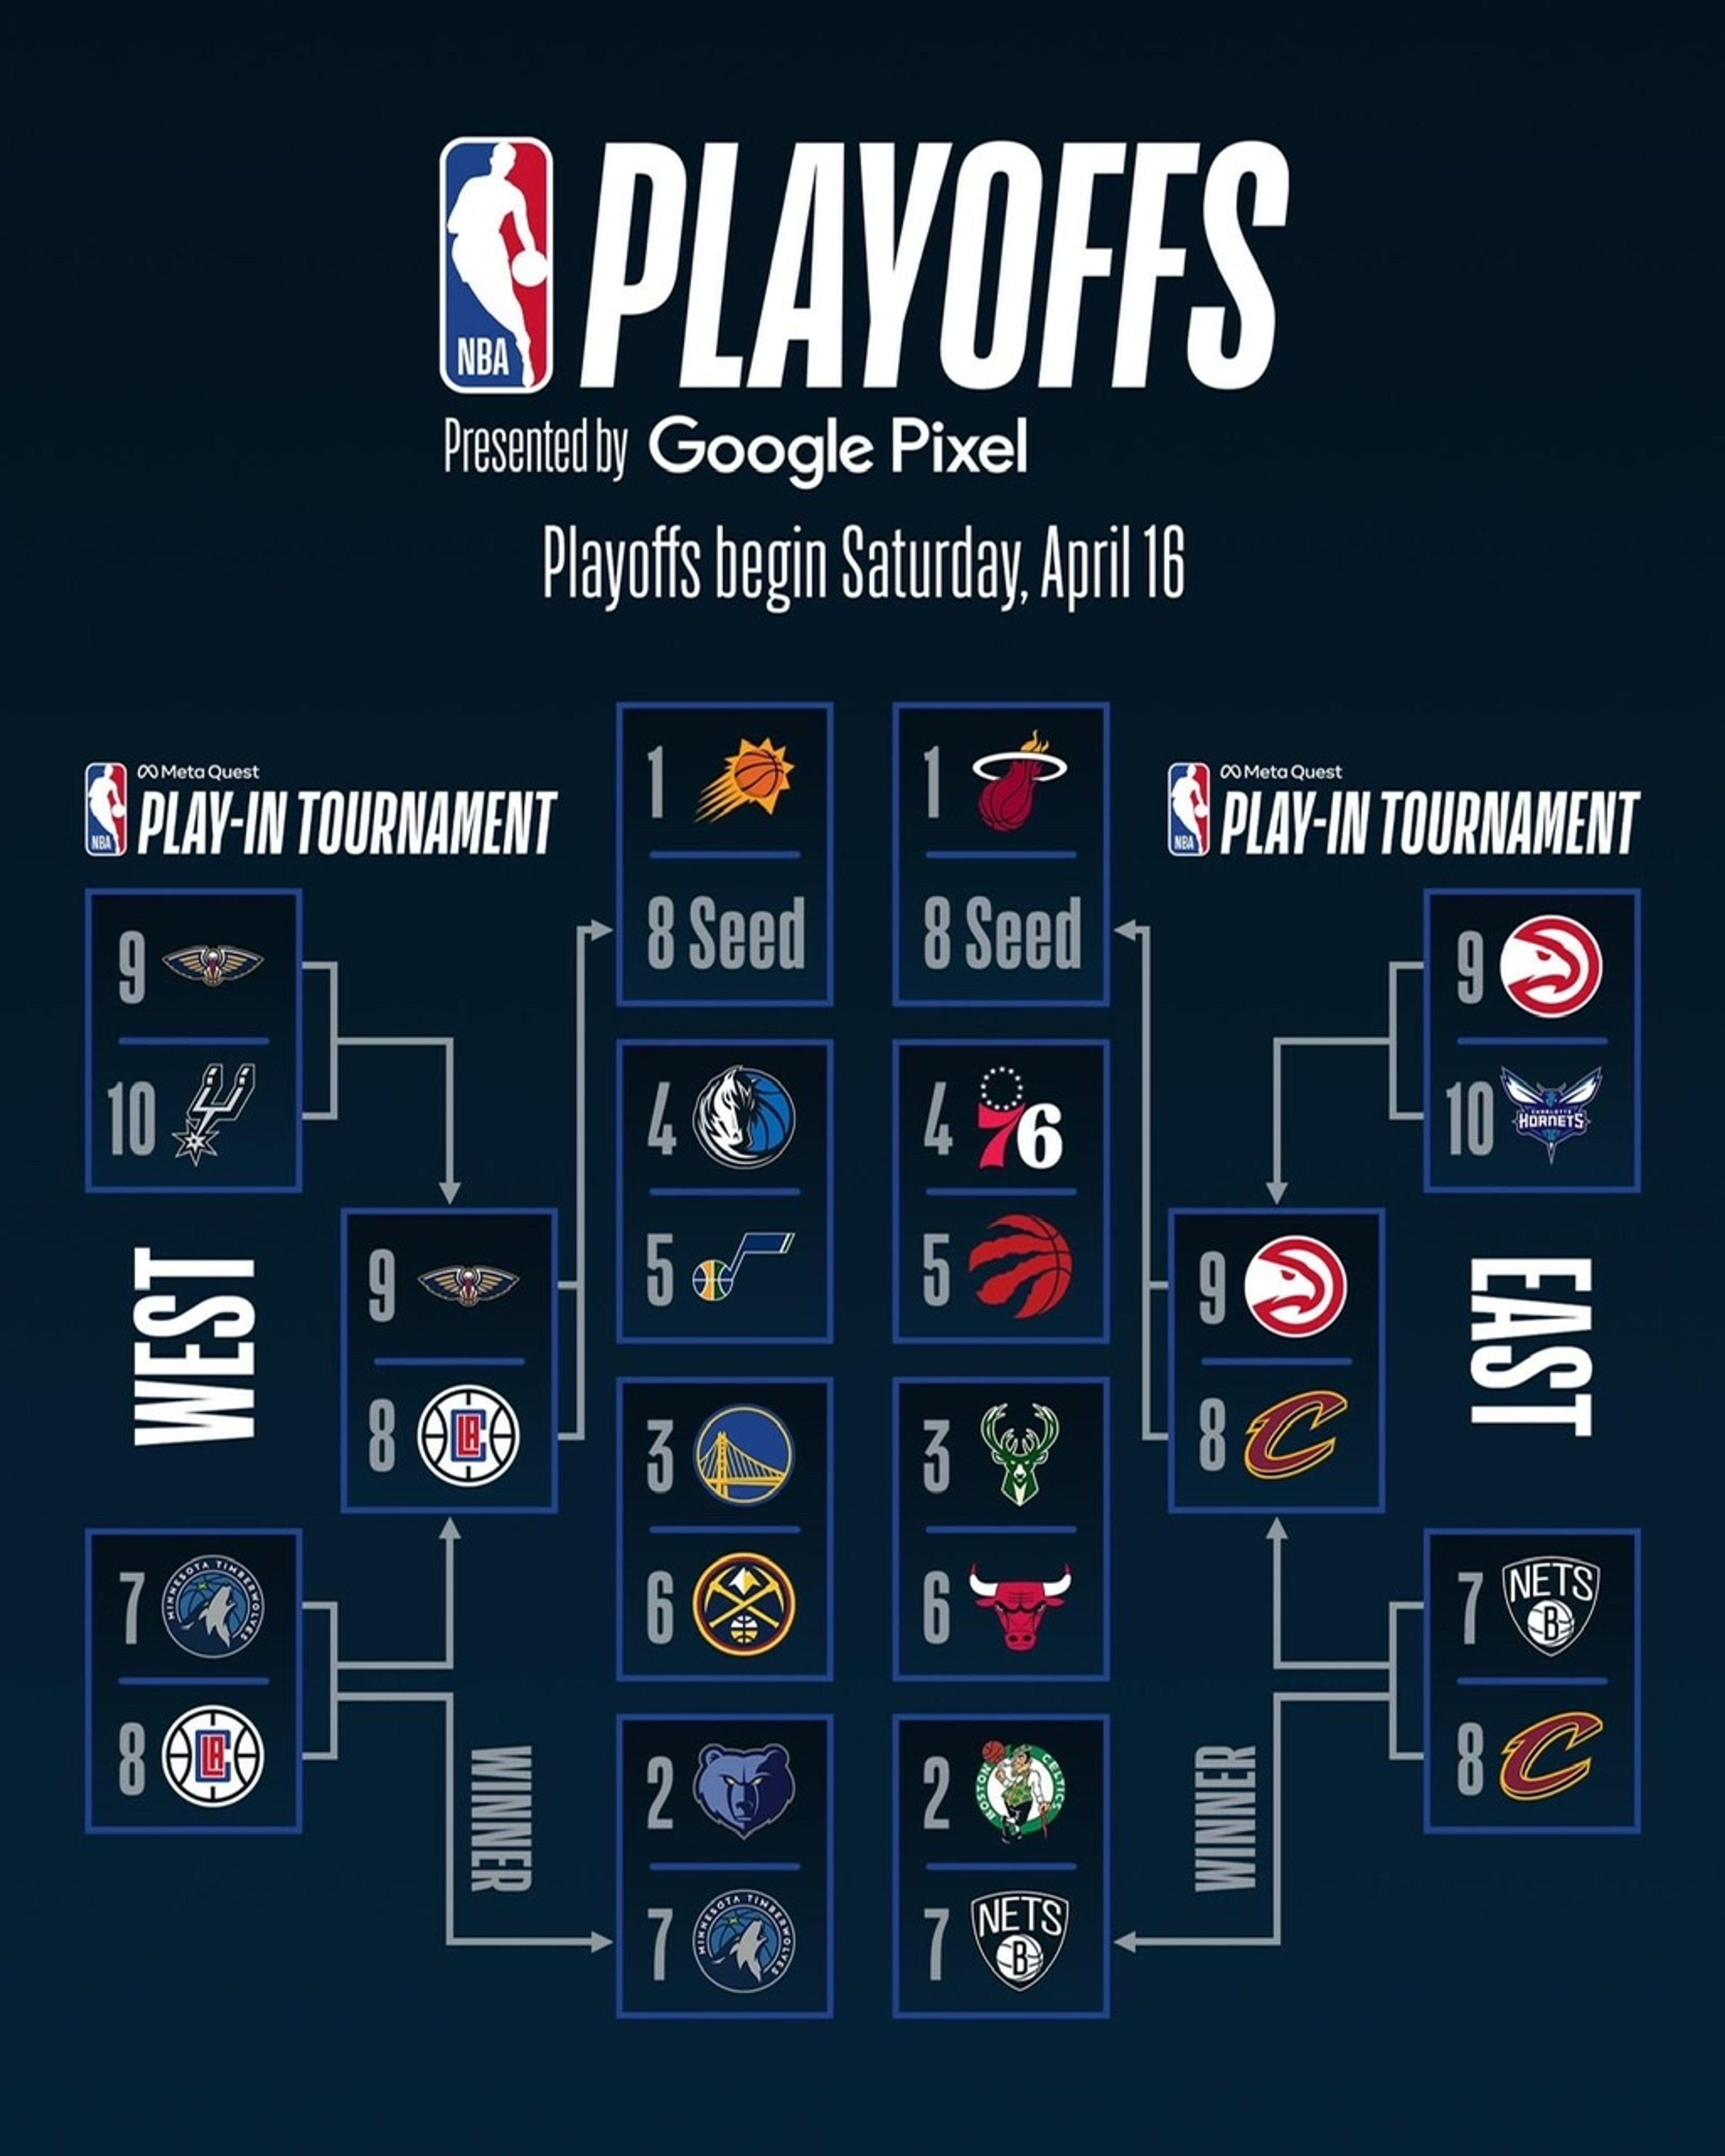 Cover Image for NBA Play-In Tournament: Brooklyn Net and Minnesota Timberwolves book their place in the Play-Offs.